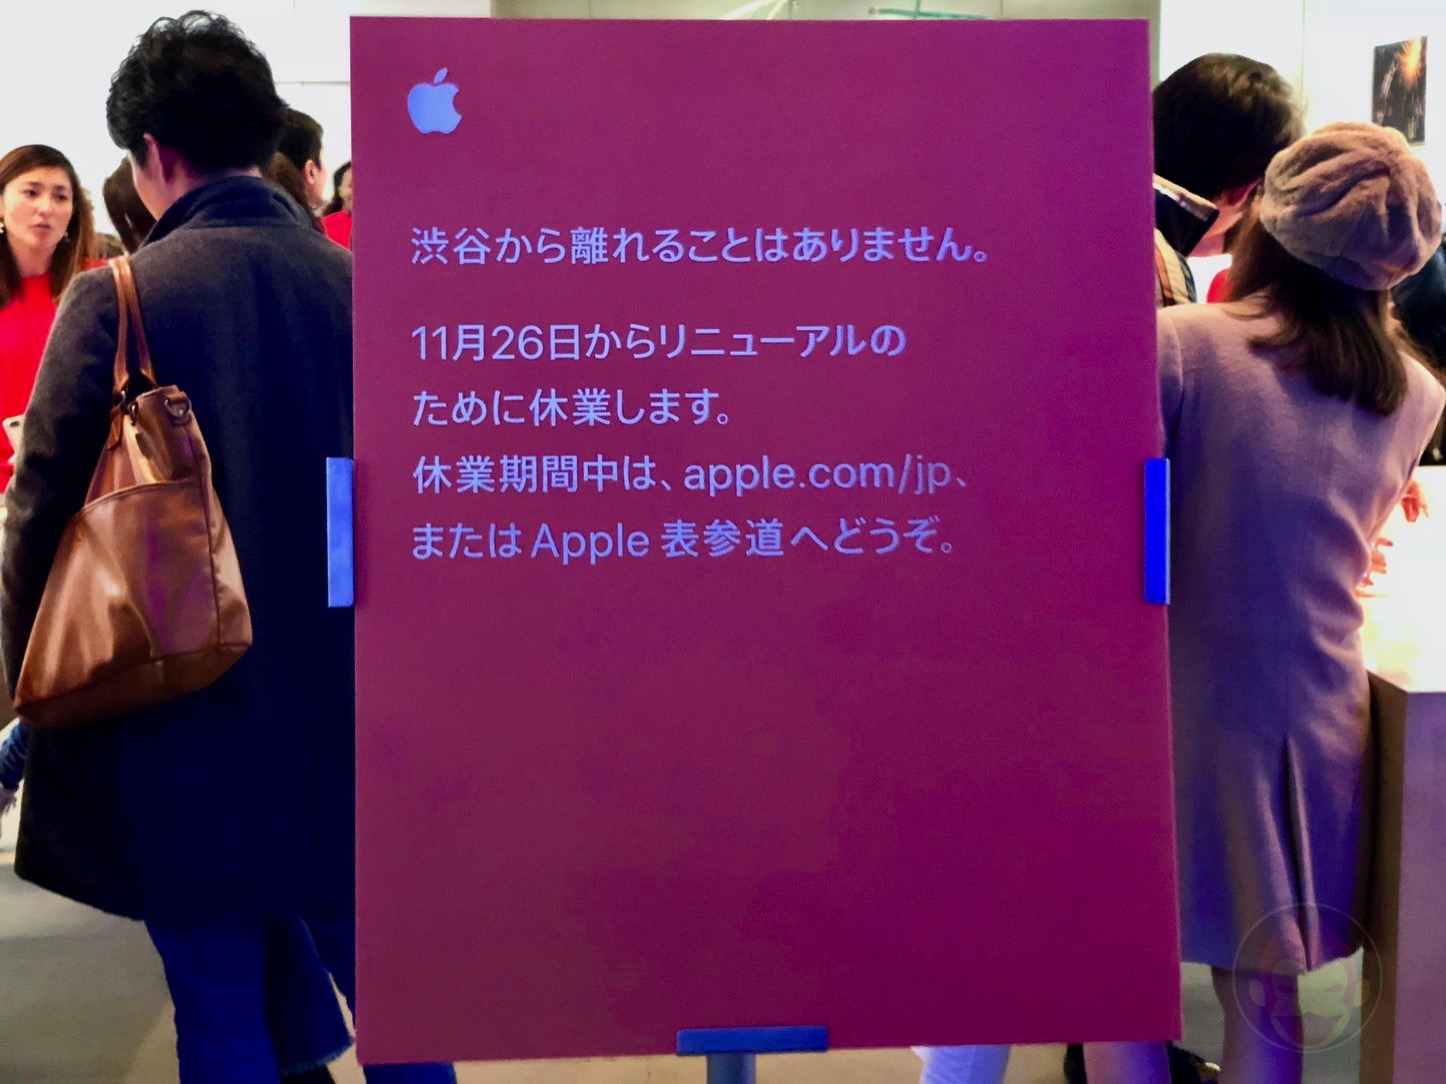 Apple-Store-Closed-for-Renewall-01.jpg